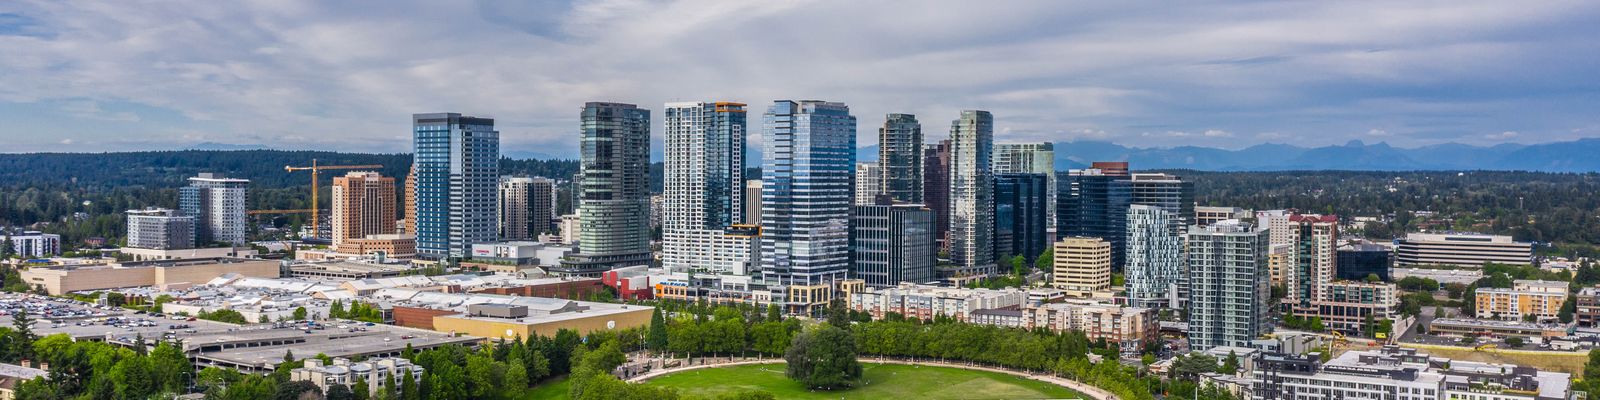 Image of Bellevue Downtown skyline on a partly-cloudy day